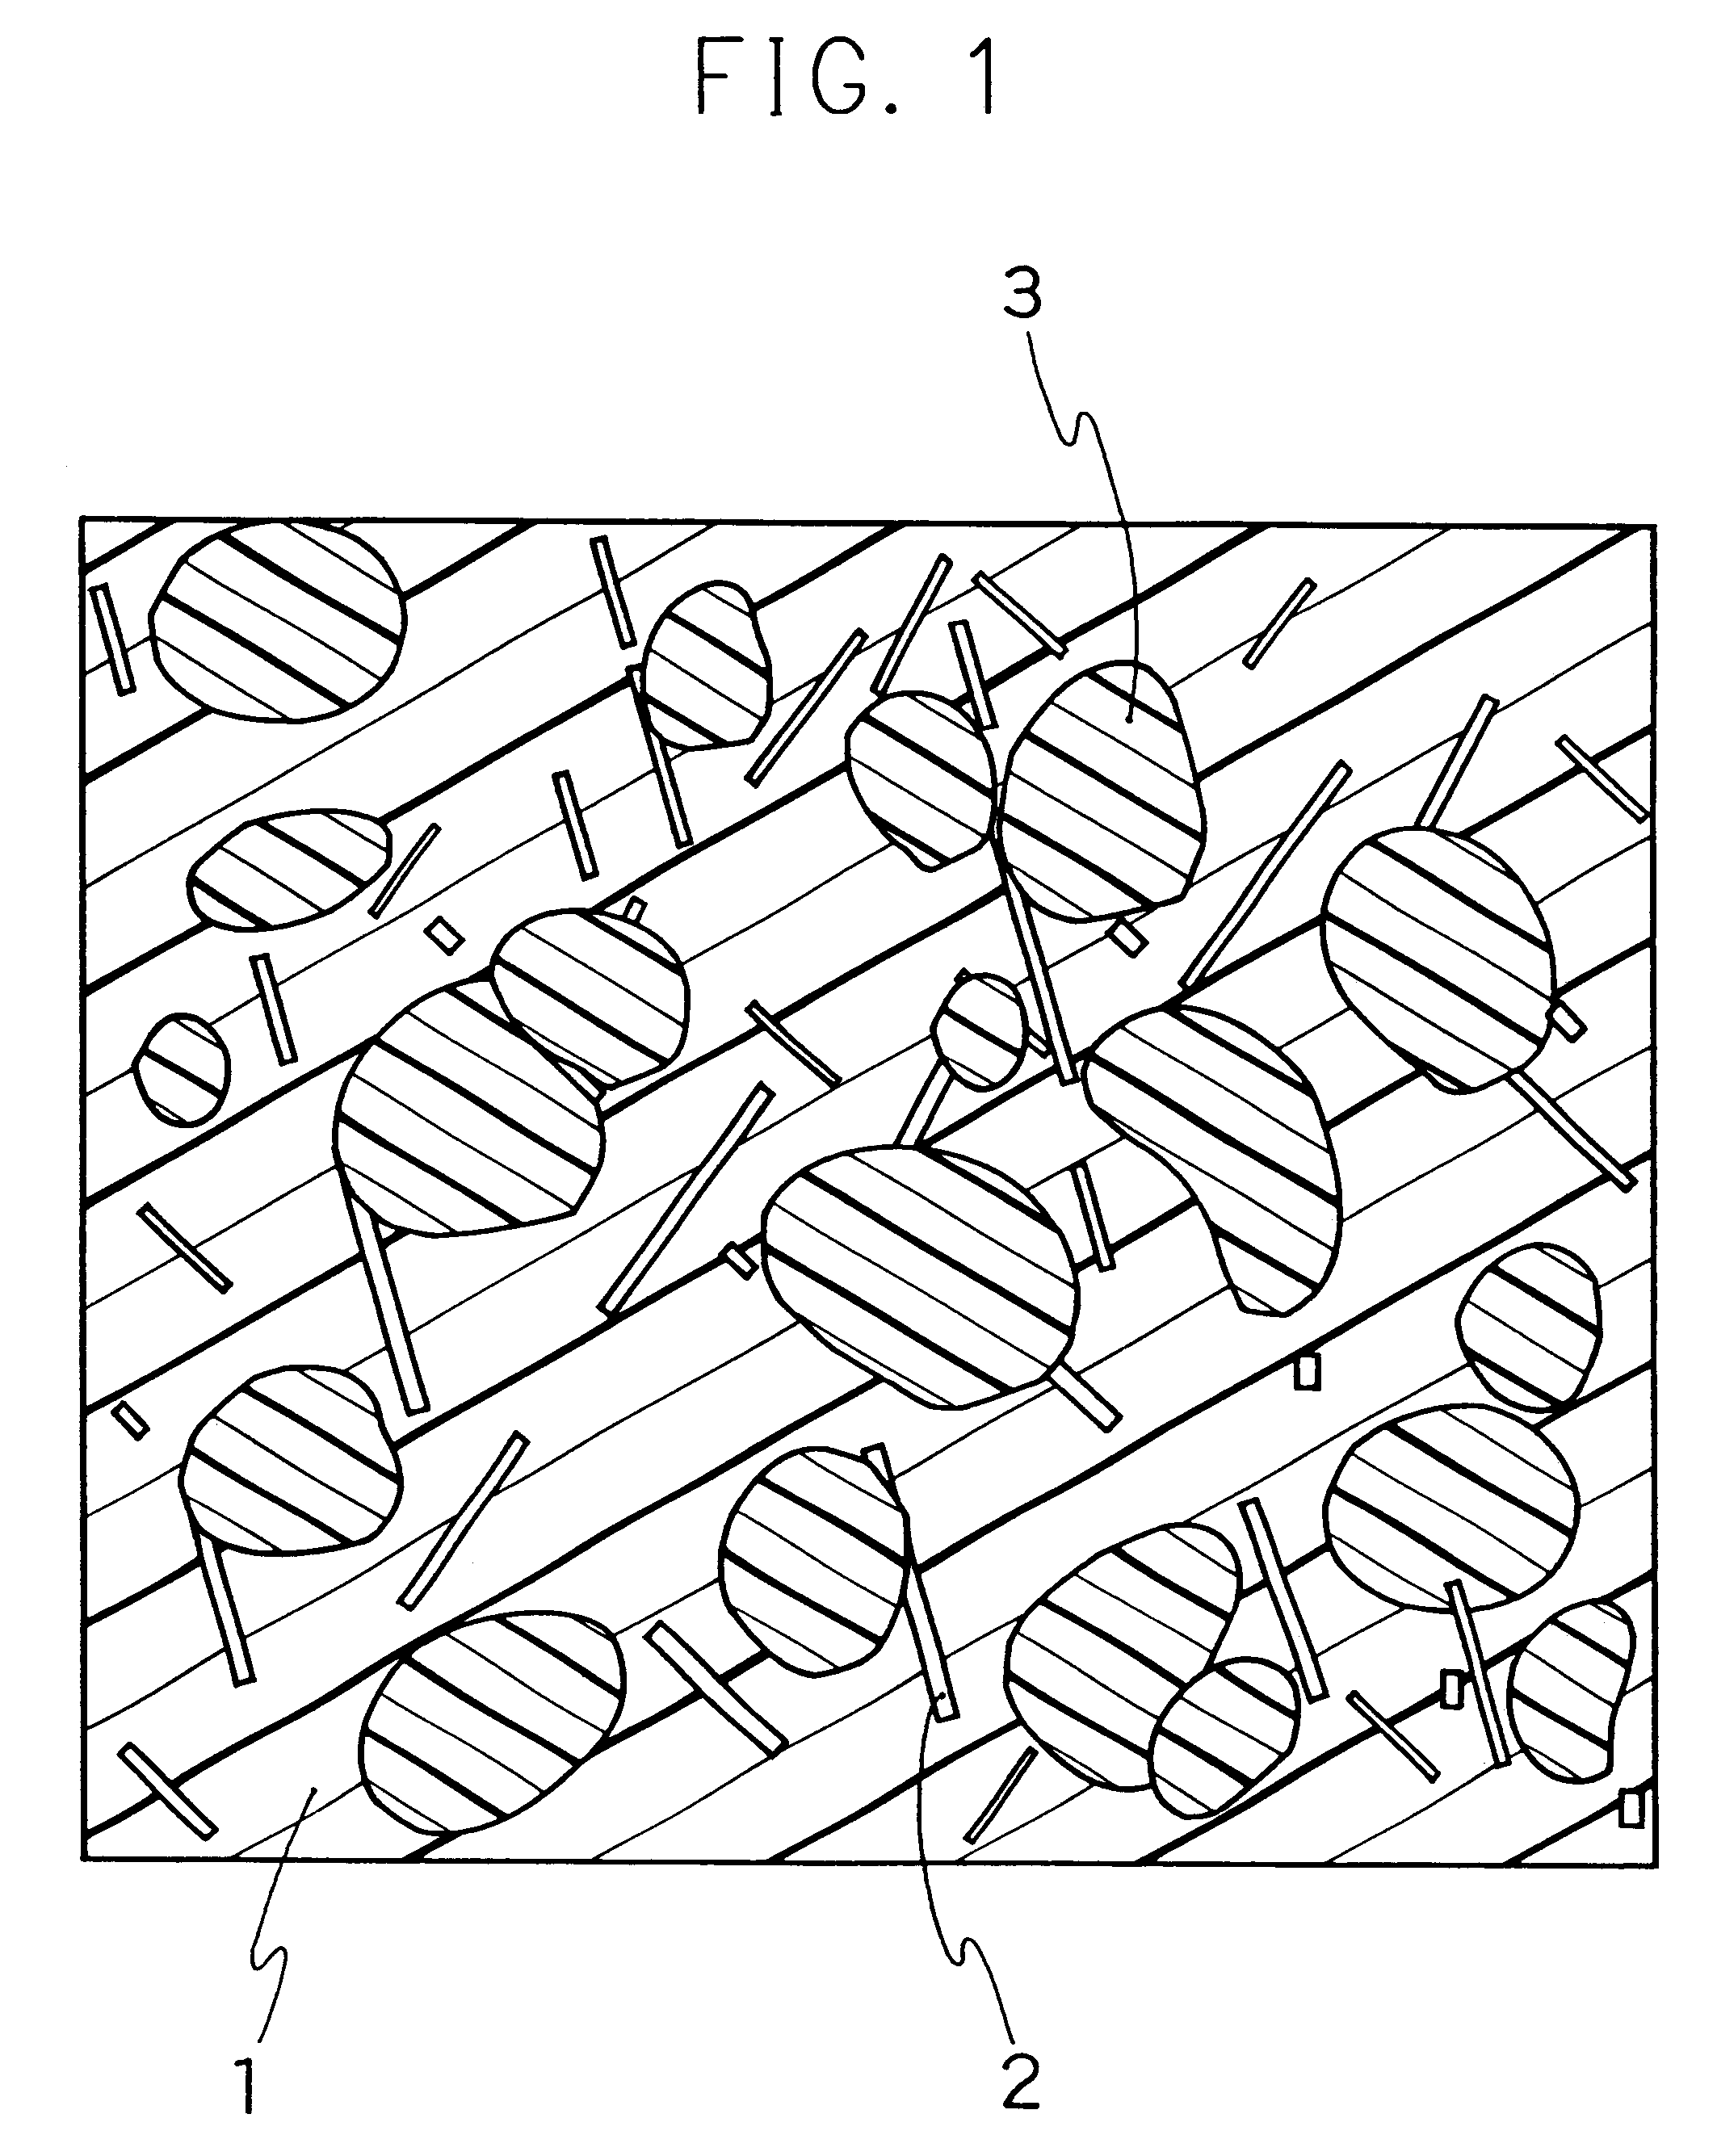 Fluorine-containing resin composition for parts of electronic and electrical equipment and same parts